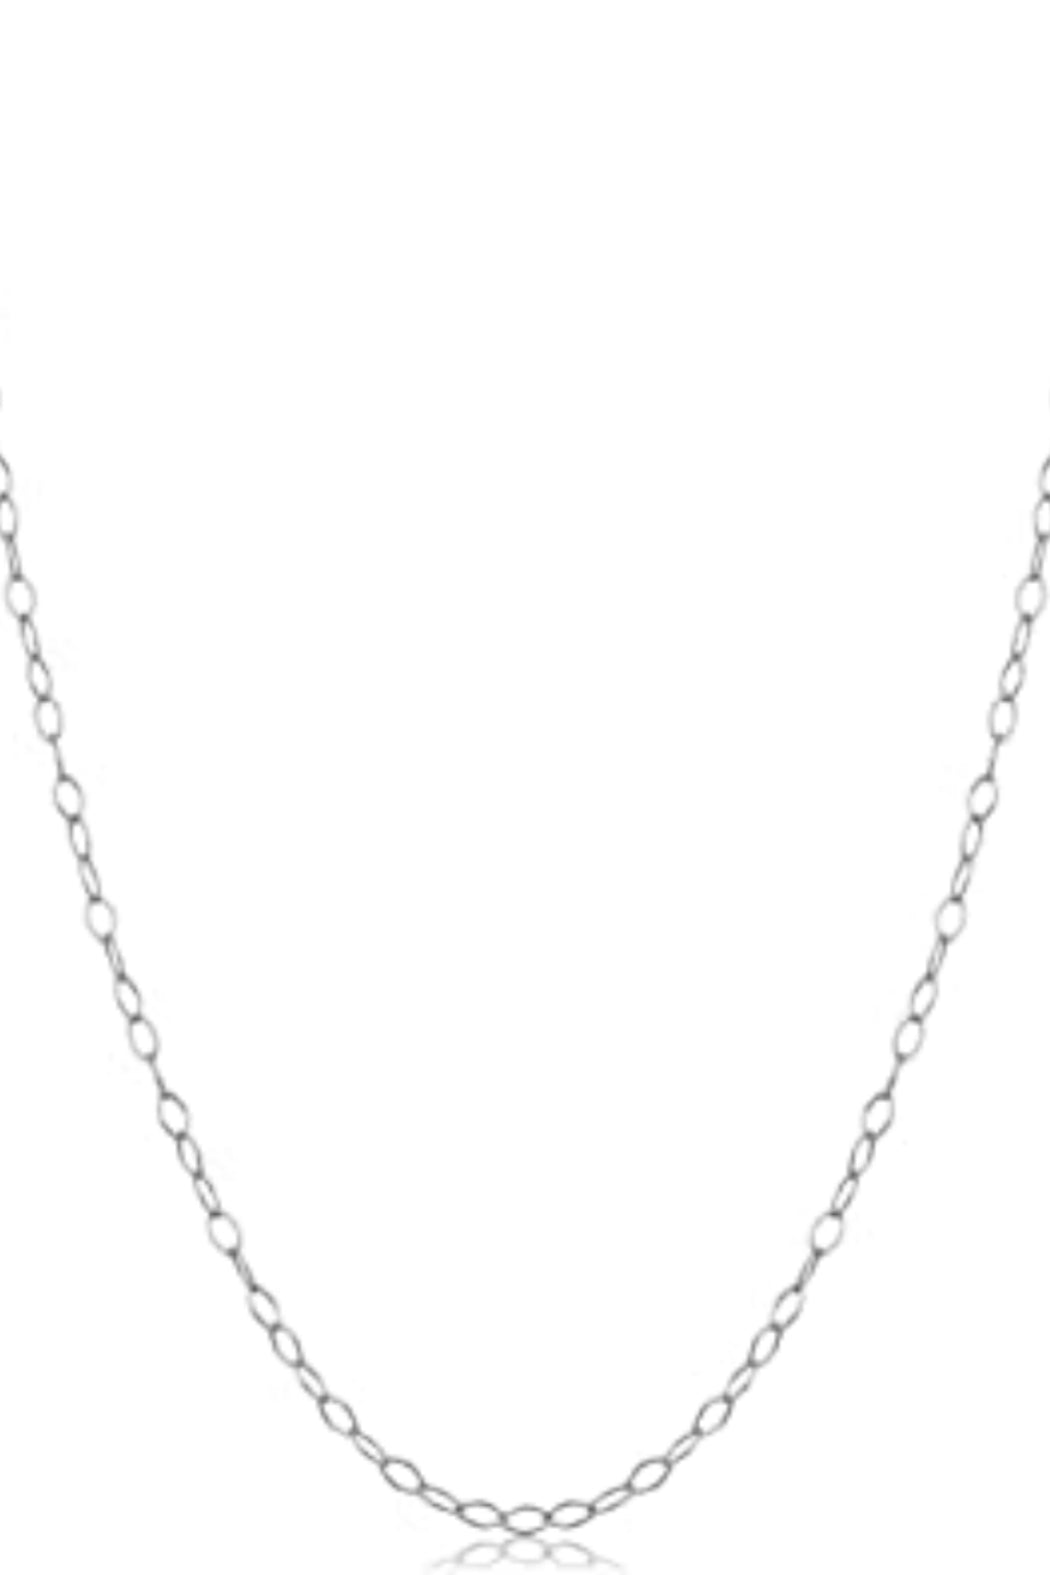 Sterling Silver Chain 16 inch